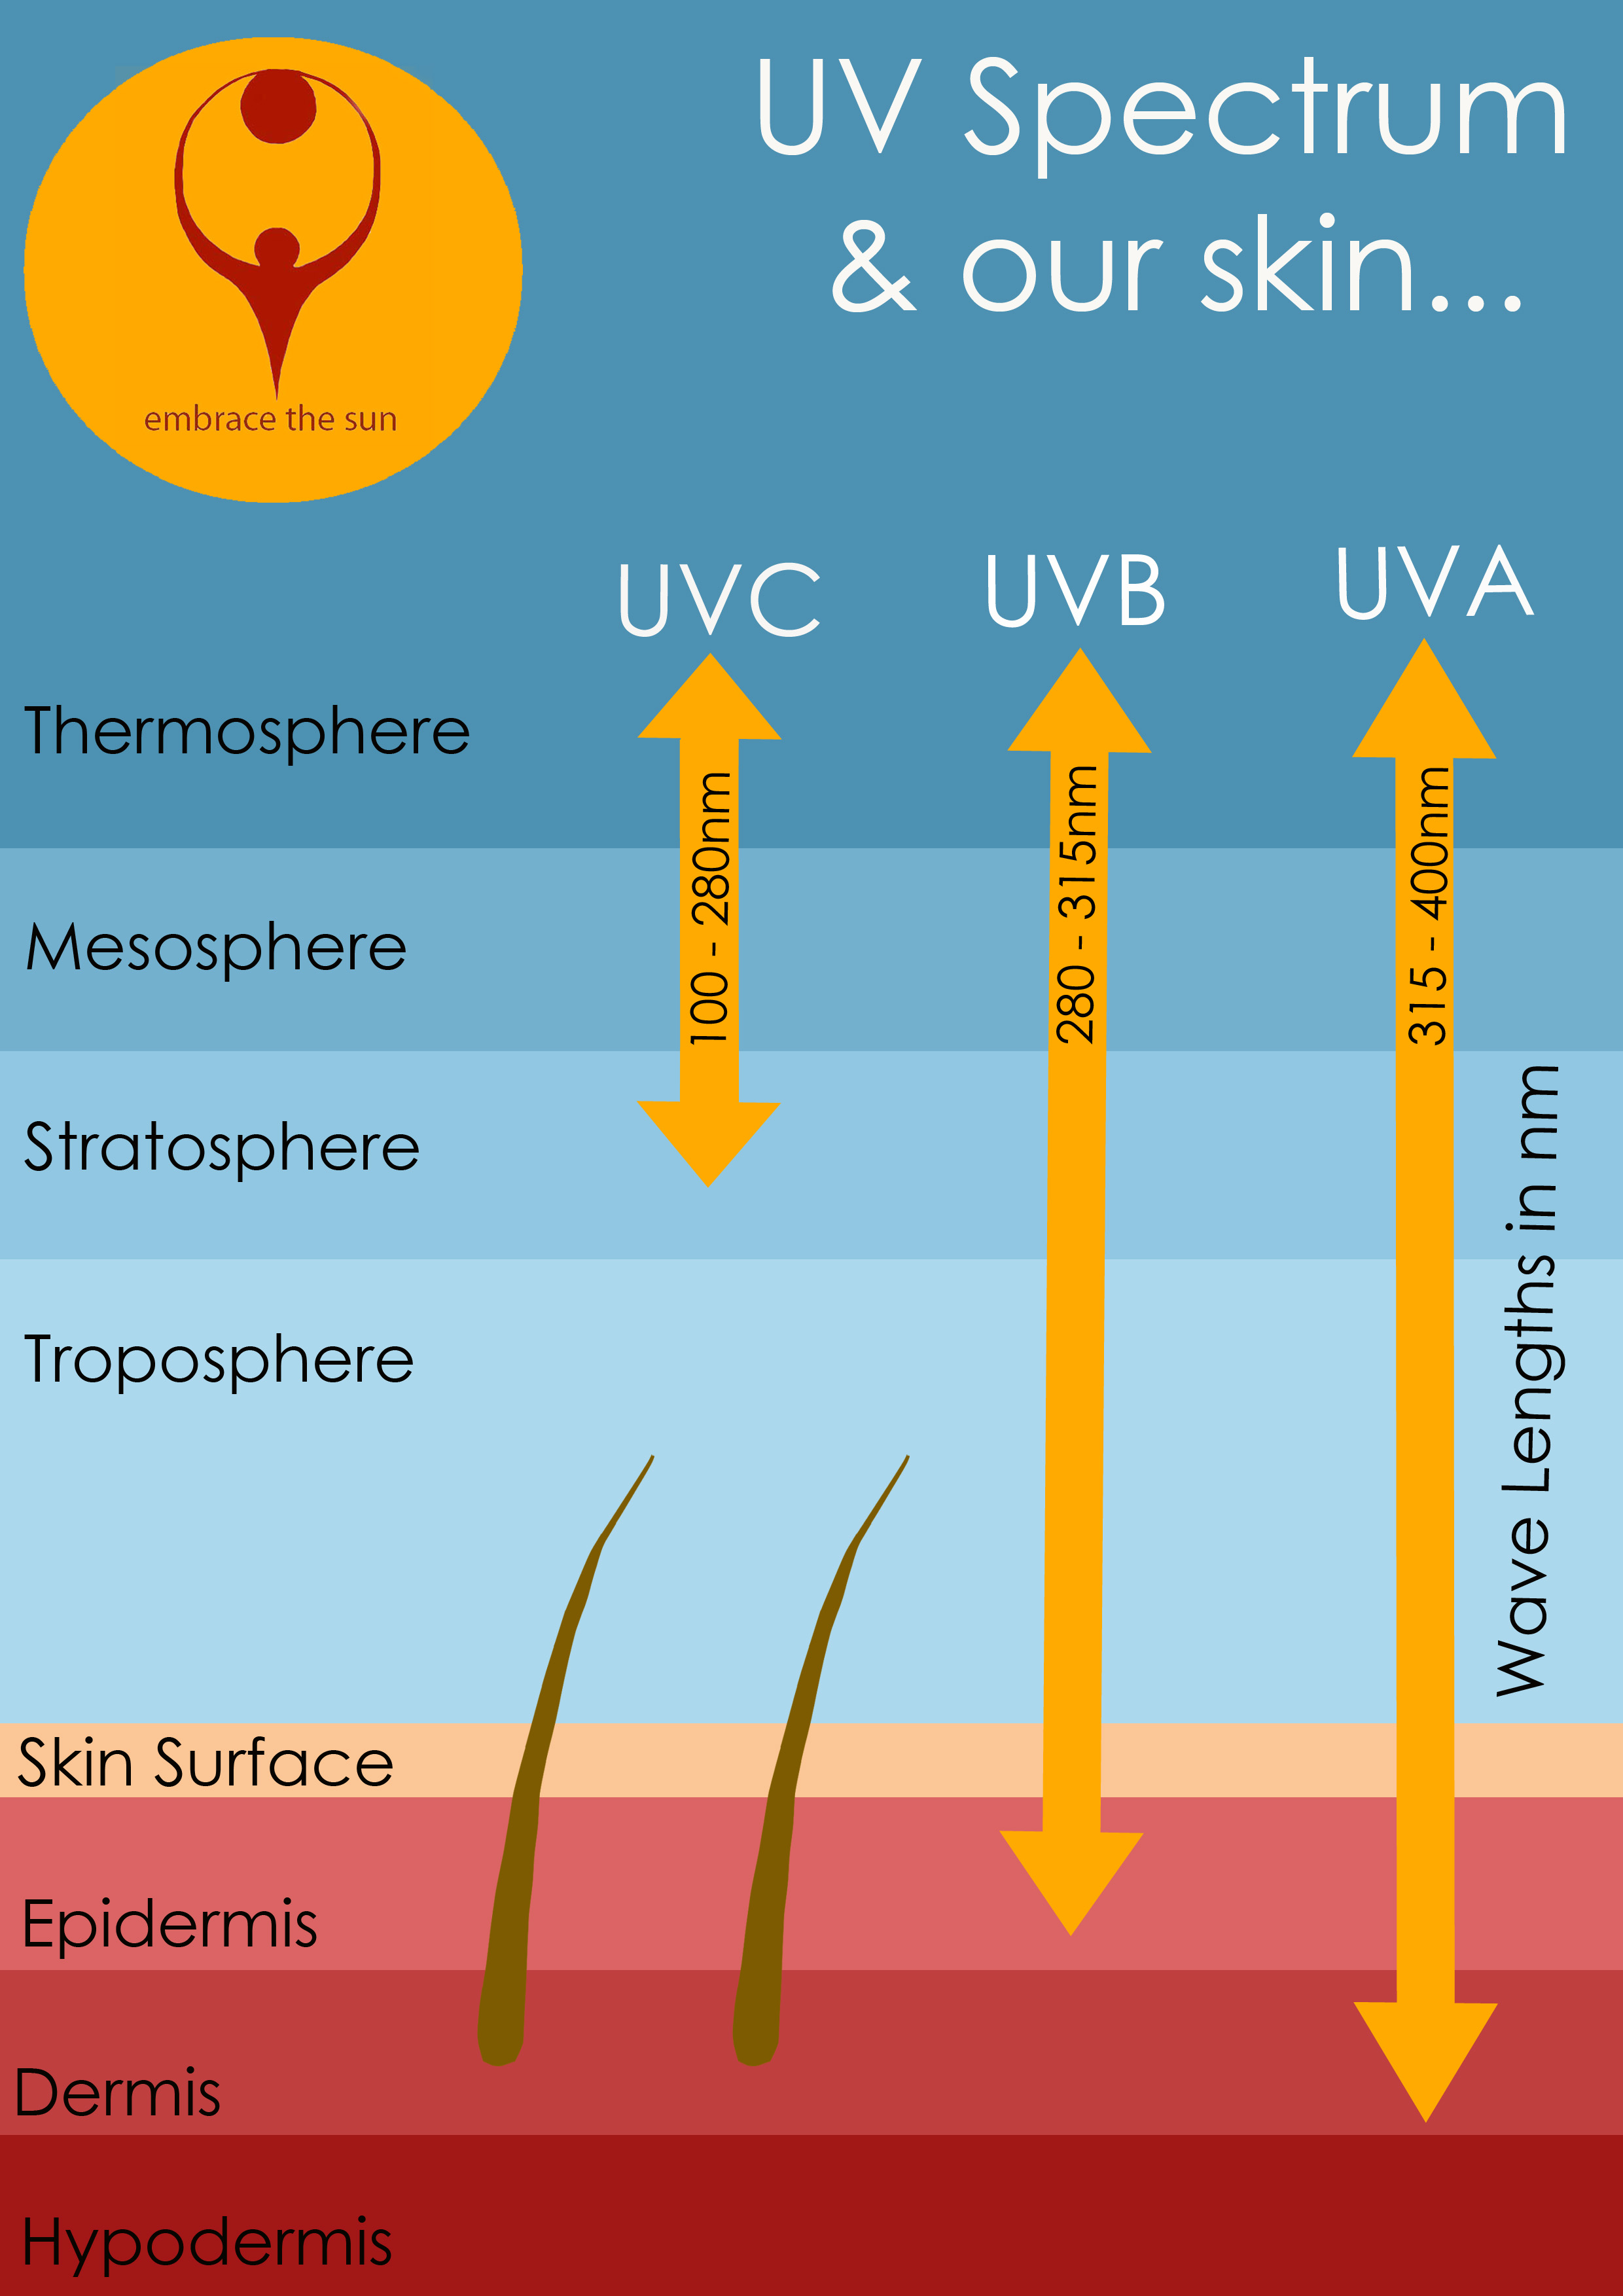 UV rays and your skin